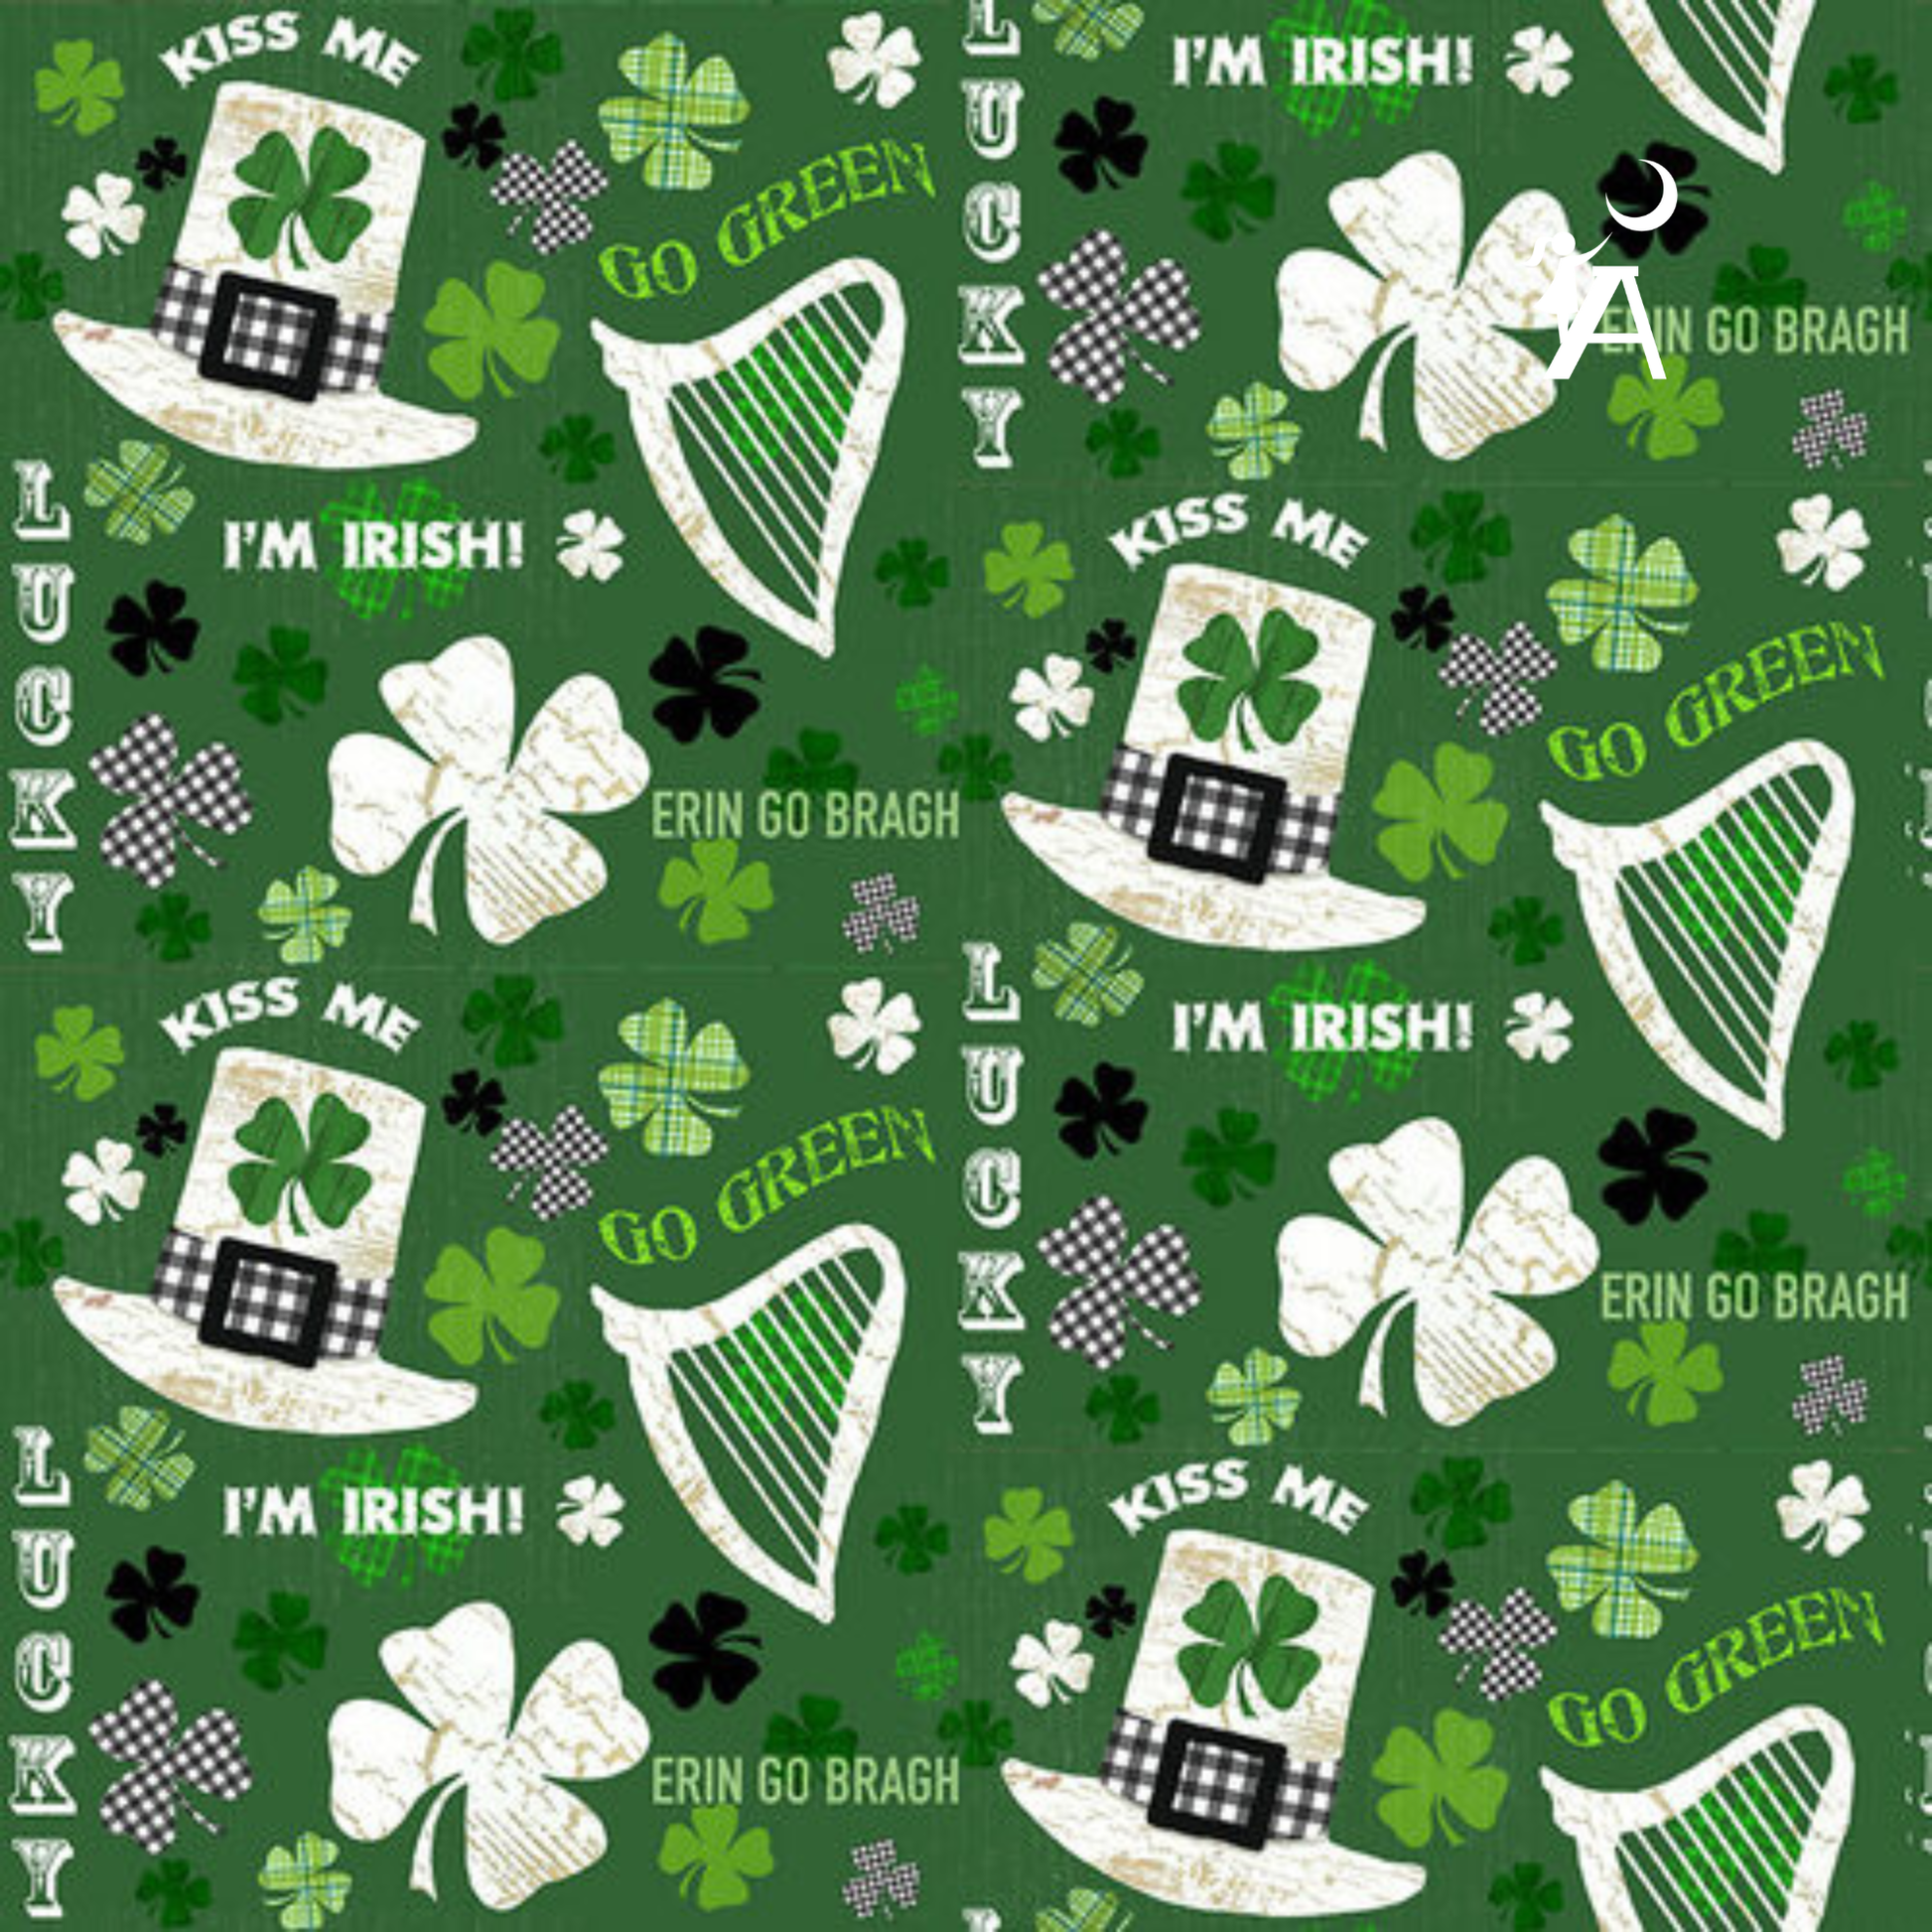 Henry Glass Quilt Kit QUILT KIT no backing Message Board Quilt Kit with Hello Lucky St. Patrick's Day Fabric, Leprechaun Quilt Kit